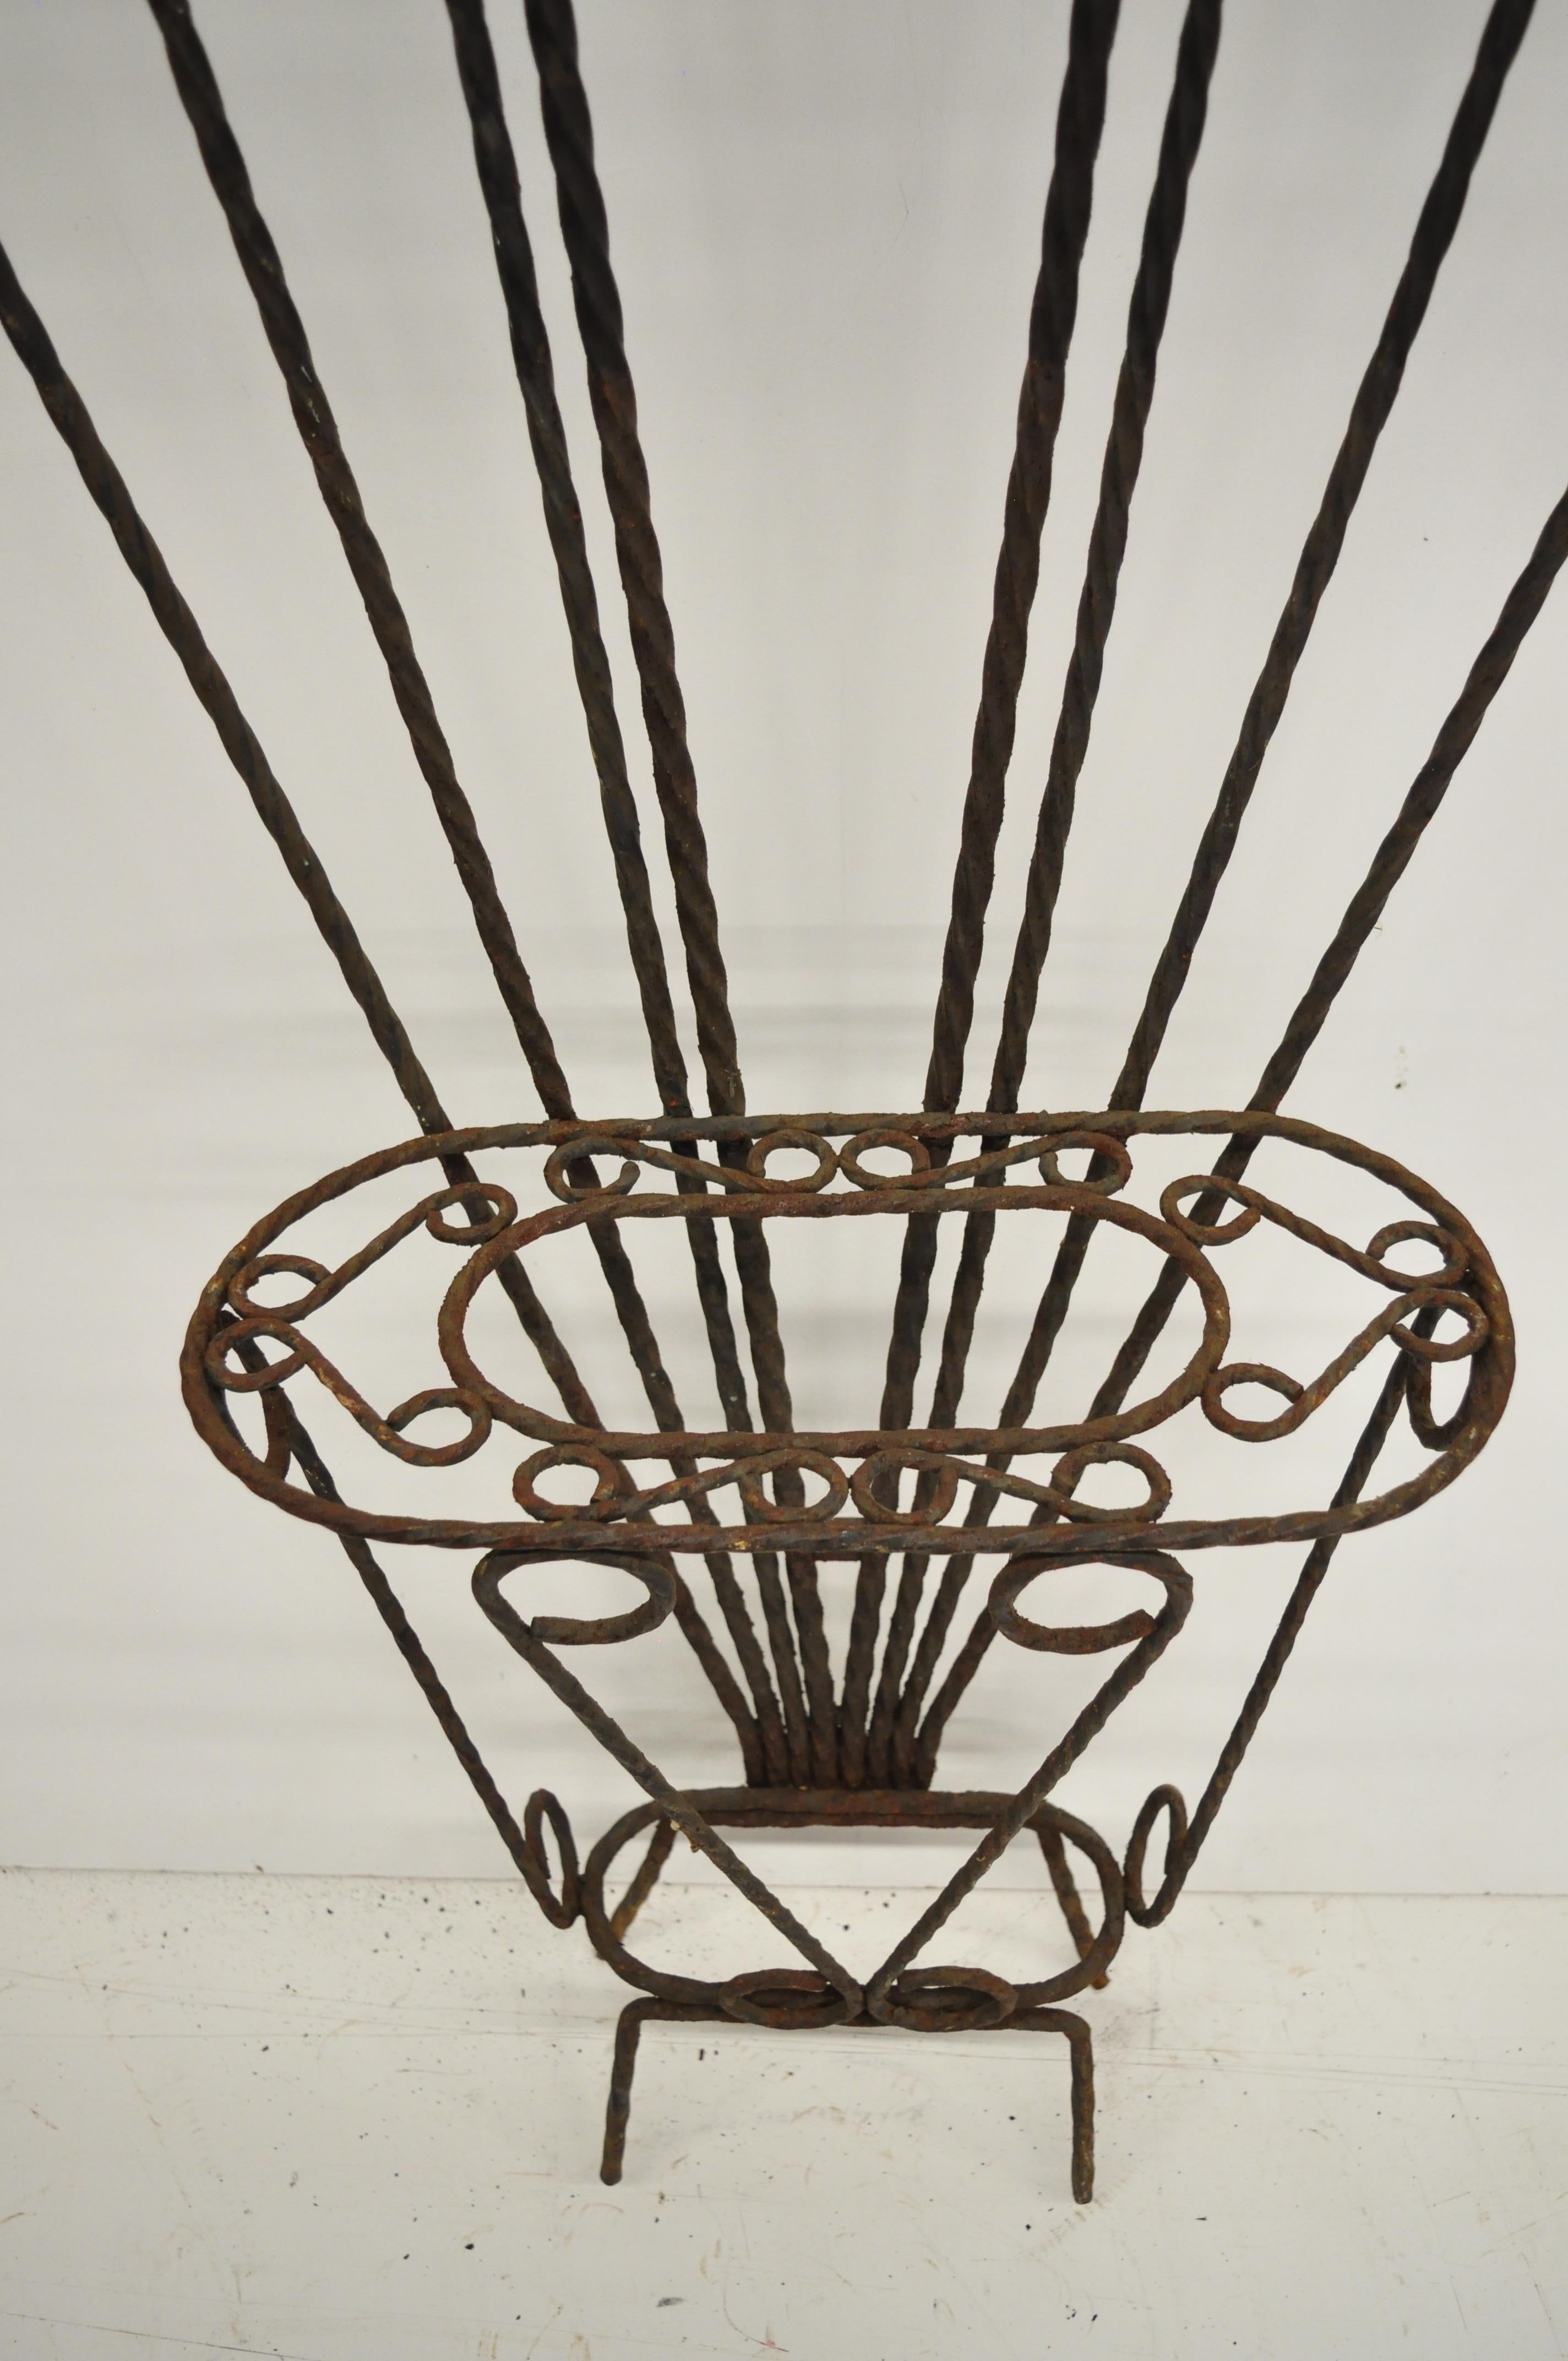 Scrolling Wrought Iron Hall Tree Coat Umbrella Mirror Stand Arts & Crafts Style In Distressed Condition For Sale In Philadelphia, PA